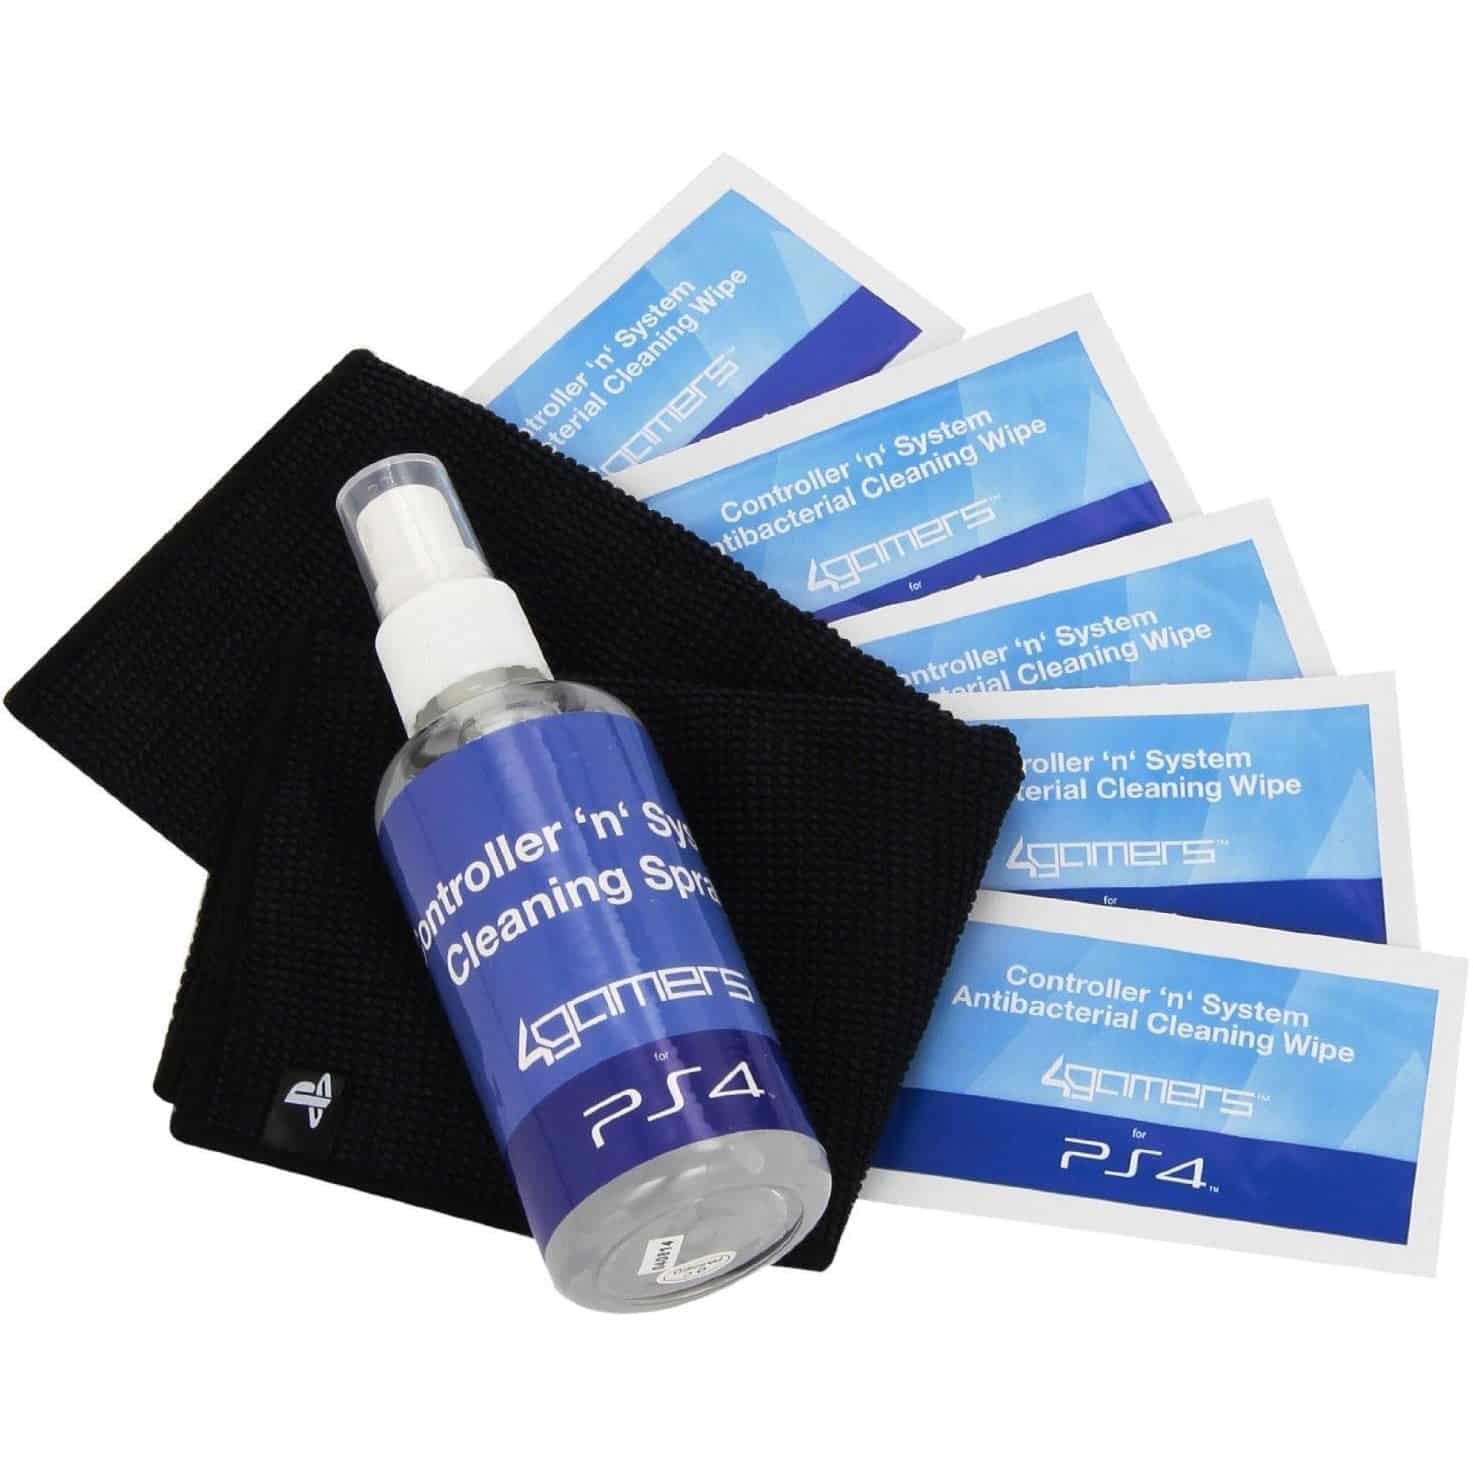 n system cleaning kit for ps4 licensed controller cleaning kit